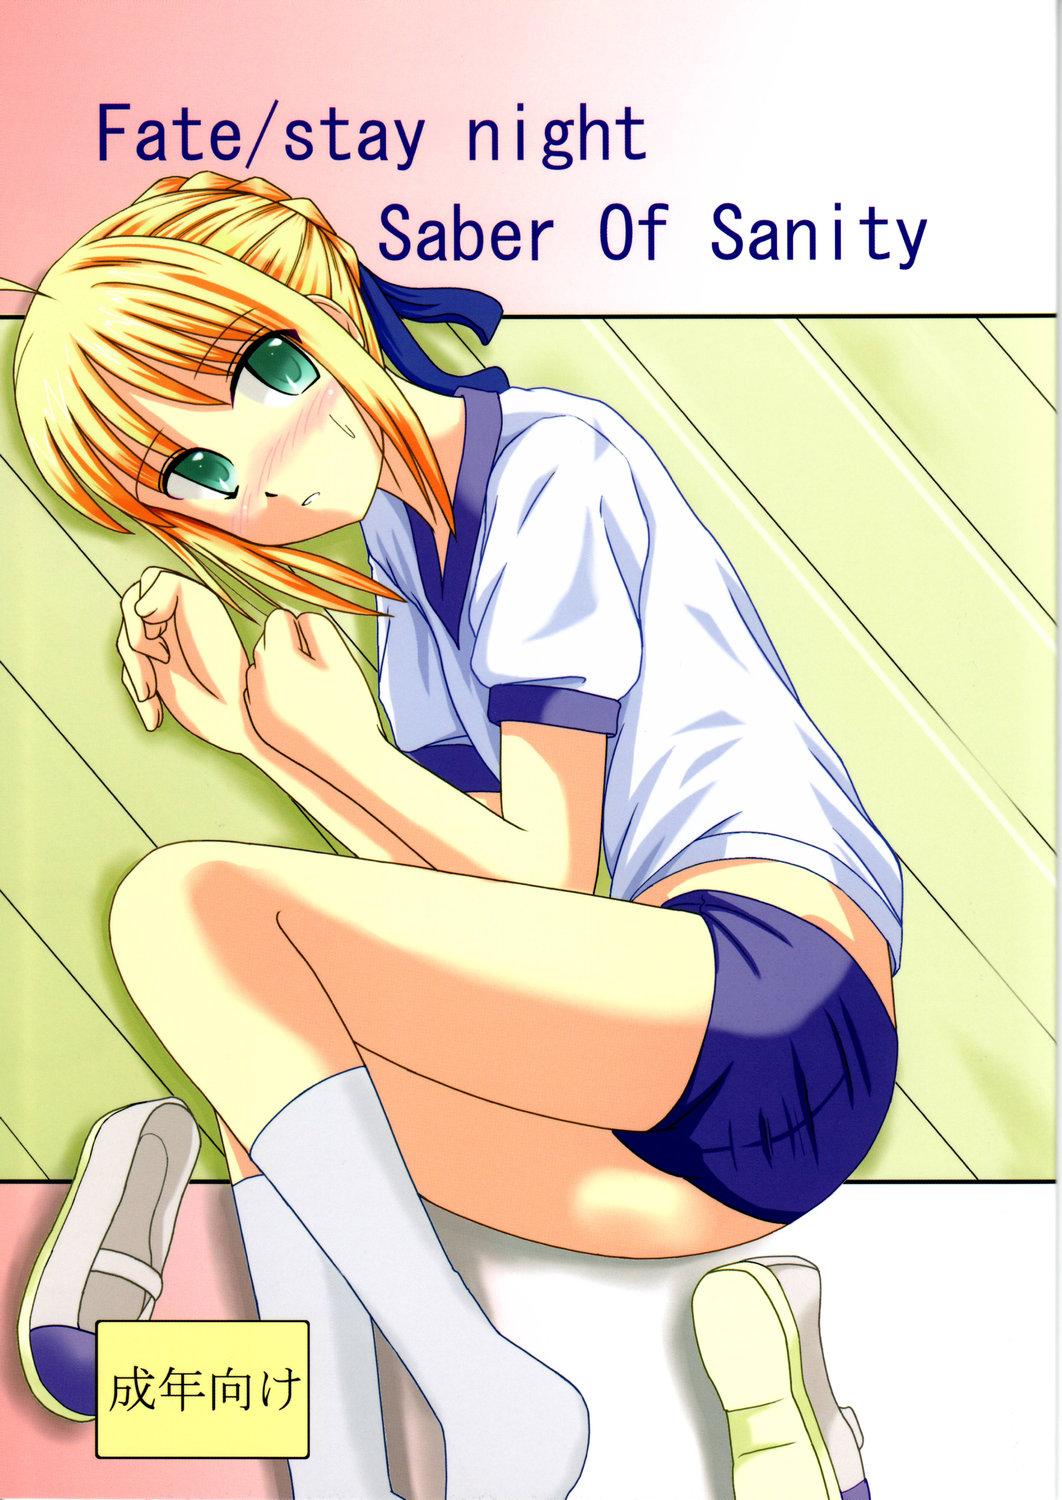 Bisex Saber Of Sanity - Fate stay night Handsome - Picture 1